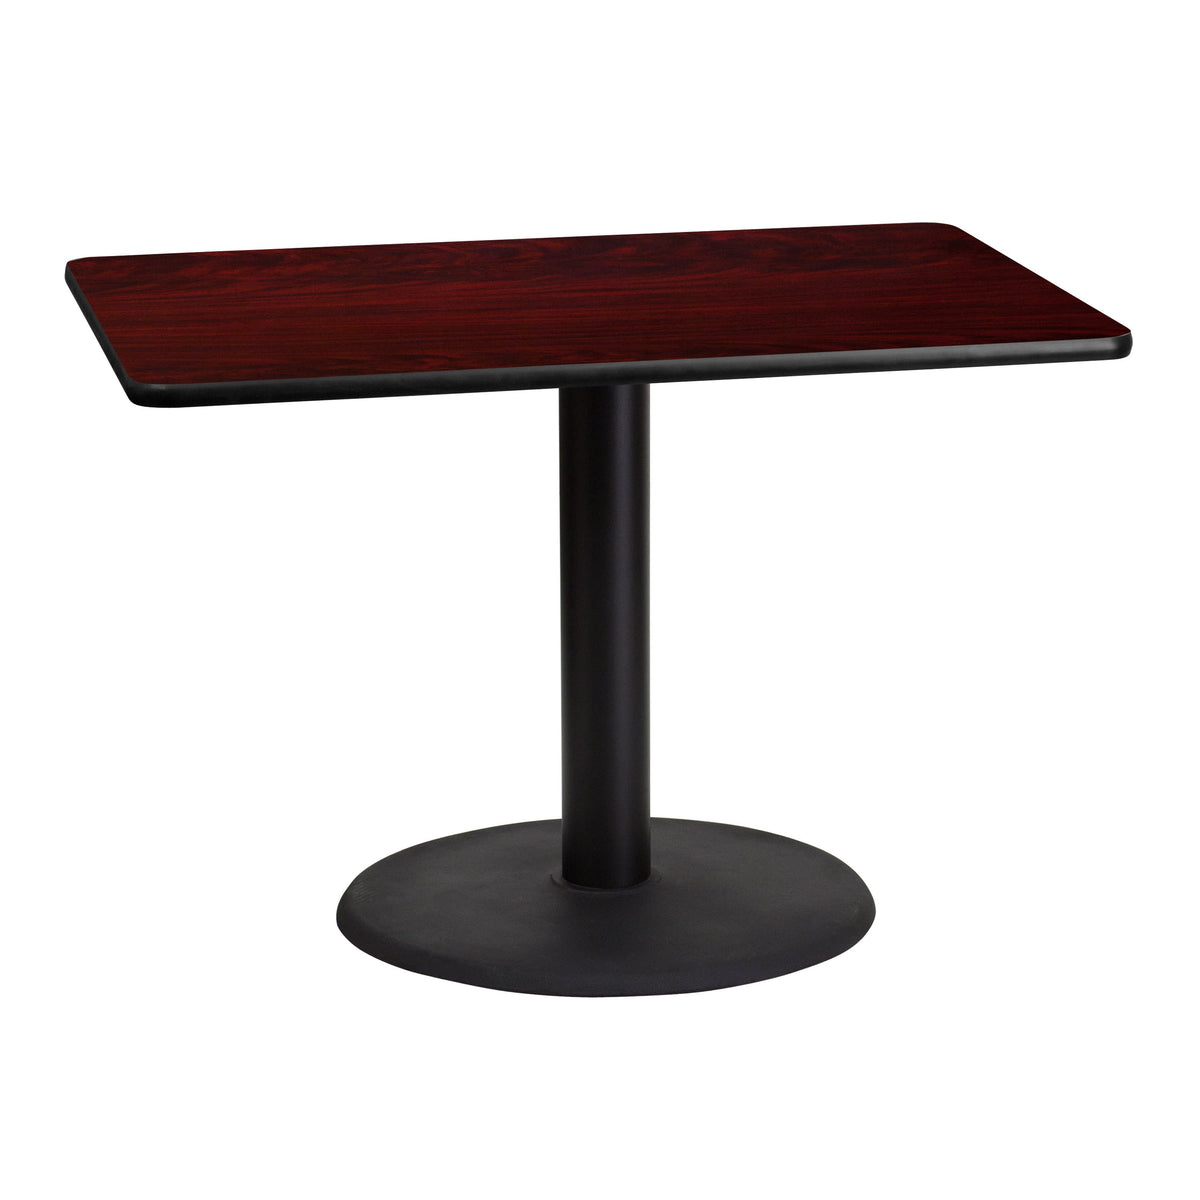 Mahogany |#| 30inch x 42inch Mahogany Laminate Table Top with 24inch Round Table Height Base